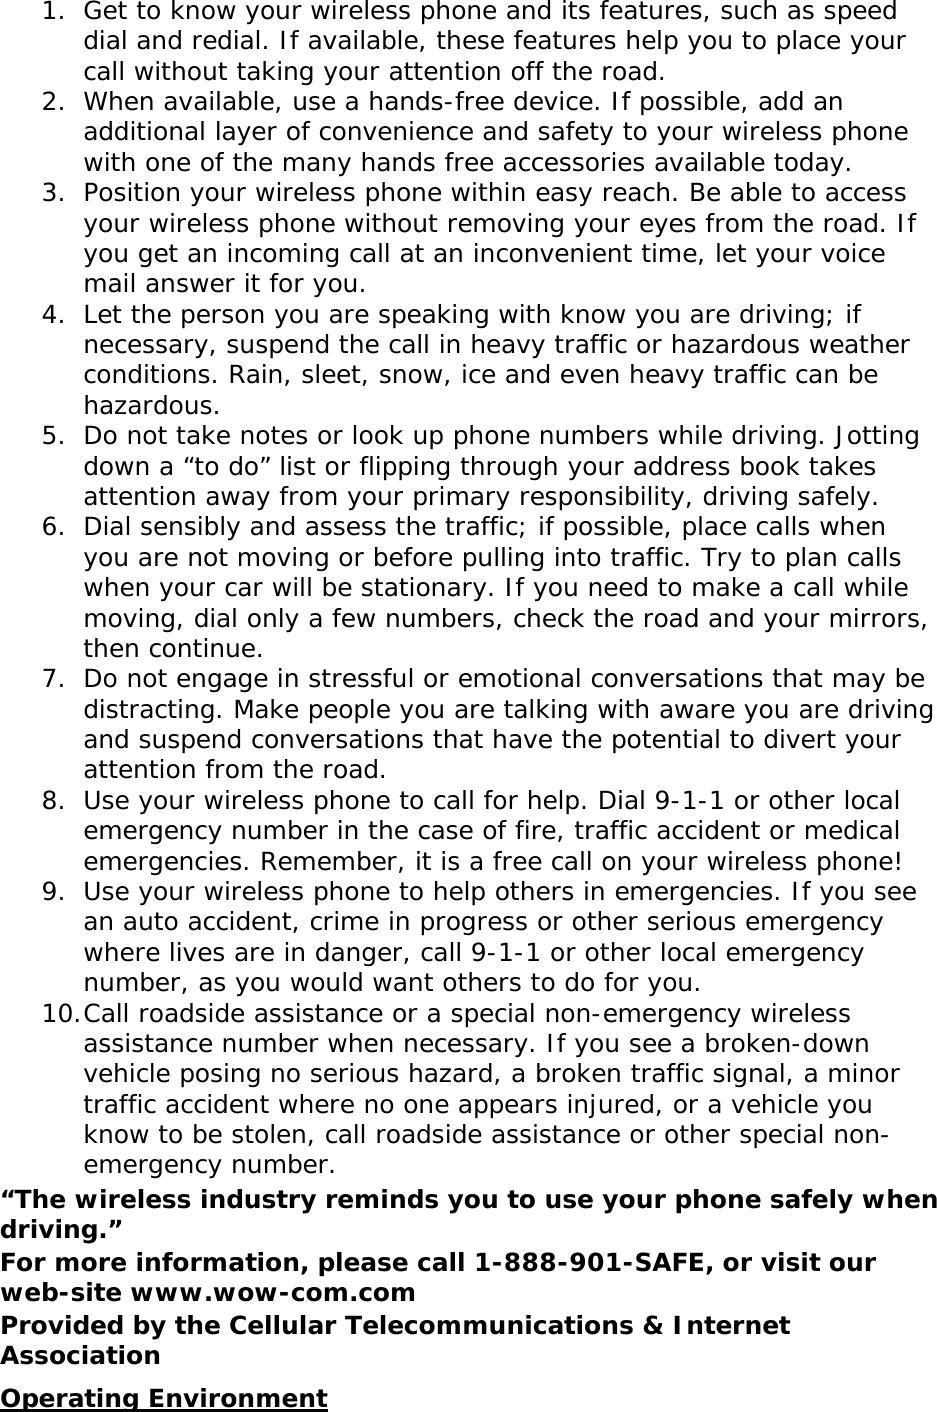 1. Get to know your wireless phone and its features, such as speed dial and redial. If available, these features help you to place your call without taking your attention off the road. 2. When available, use a hands-free device. If possible, add an additional layer of convenience and safety to your wireless phone with one of the many hands free accessories available today. 3. Position your wireless phone within easy reach. Be able to access your wireless phone without removing your eyes from the road. If you get an incoming call at an inconvenient time, let your voice mail answer it for you. 4. Let the person you are speaking with know you are driving; if necessary, suspend the call in heavy traffic or hazardous weather conditions. Rain, sleet, snow, ice and even heavy traffic can be hazardous. 5. Do not take notes or look up phone numbers while driving. Jotting down a “to do” list or flipping through your address book takes attention away from your primary responsibility, driving safely. 6. Dial sensibly and assess the traffic; if possible, place calls when you are not moving or before pulling into traffic. Try to plan calls when your car will be stationary. If you need to make a call while moving, dial only a few numbers, check the road and your mirrors, then continue. 7. Do not engage in stressful or emotional conversations that may be distracting. Make people you are talking with aware you are driving and suspend conversations that have the potential to divert your attention from the road. 8. Use your wireless phone to call for help. Dial 9-1-1 or other local emergency number in the case of fire, traffic accident or medical emergencies. Remember, it is a free call on your wireless phone! 9. Use your wireless phone to help others in emergencies. If you see an auto accident, crime in progress or other serious emergency where lives are in danger, call 9-1-1 or other local emergency number, as you would want others to do for you. 10. Call roadside assistance or a special non-emergency wireless assistance number when necessary. If you see a broken-down vehicle posing no serious hazard, a broken traffic signal, a minor traffic accident where no one appears injured, or a vehicle you know to be stolen, call roadside assistance or other special non-emergency number. “The wireless industry reminds you to use your phone safely when driving.” For more information, please call 1-888-901-SAFE, or visit our web-site www.wow-com.com Provided by the Cellular Telecommunications &amp; Internet Association Operating Environment 